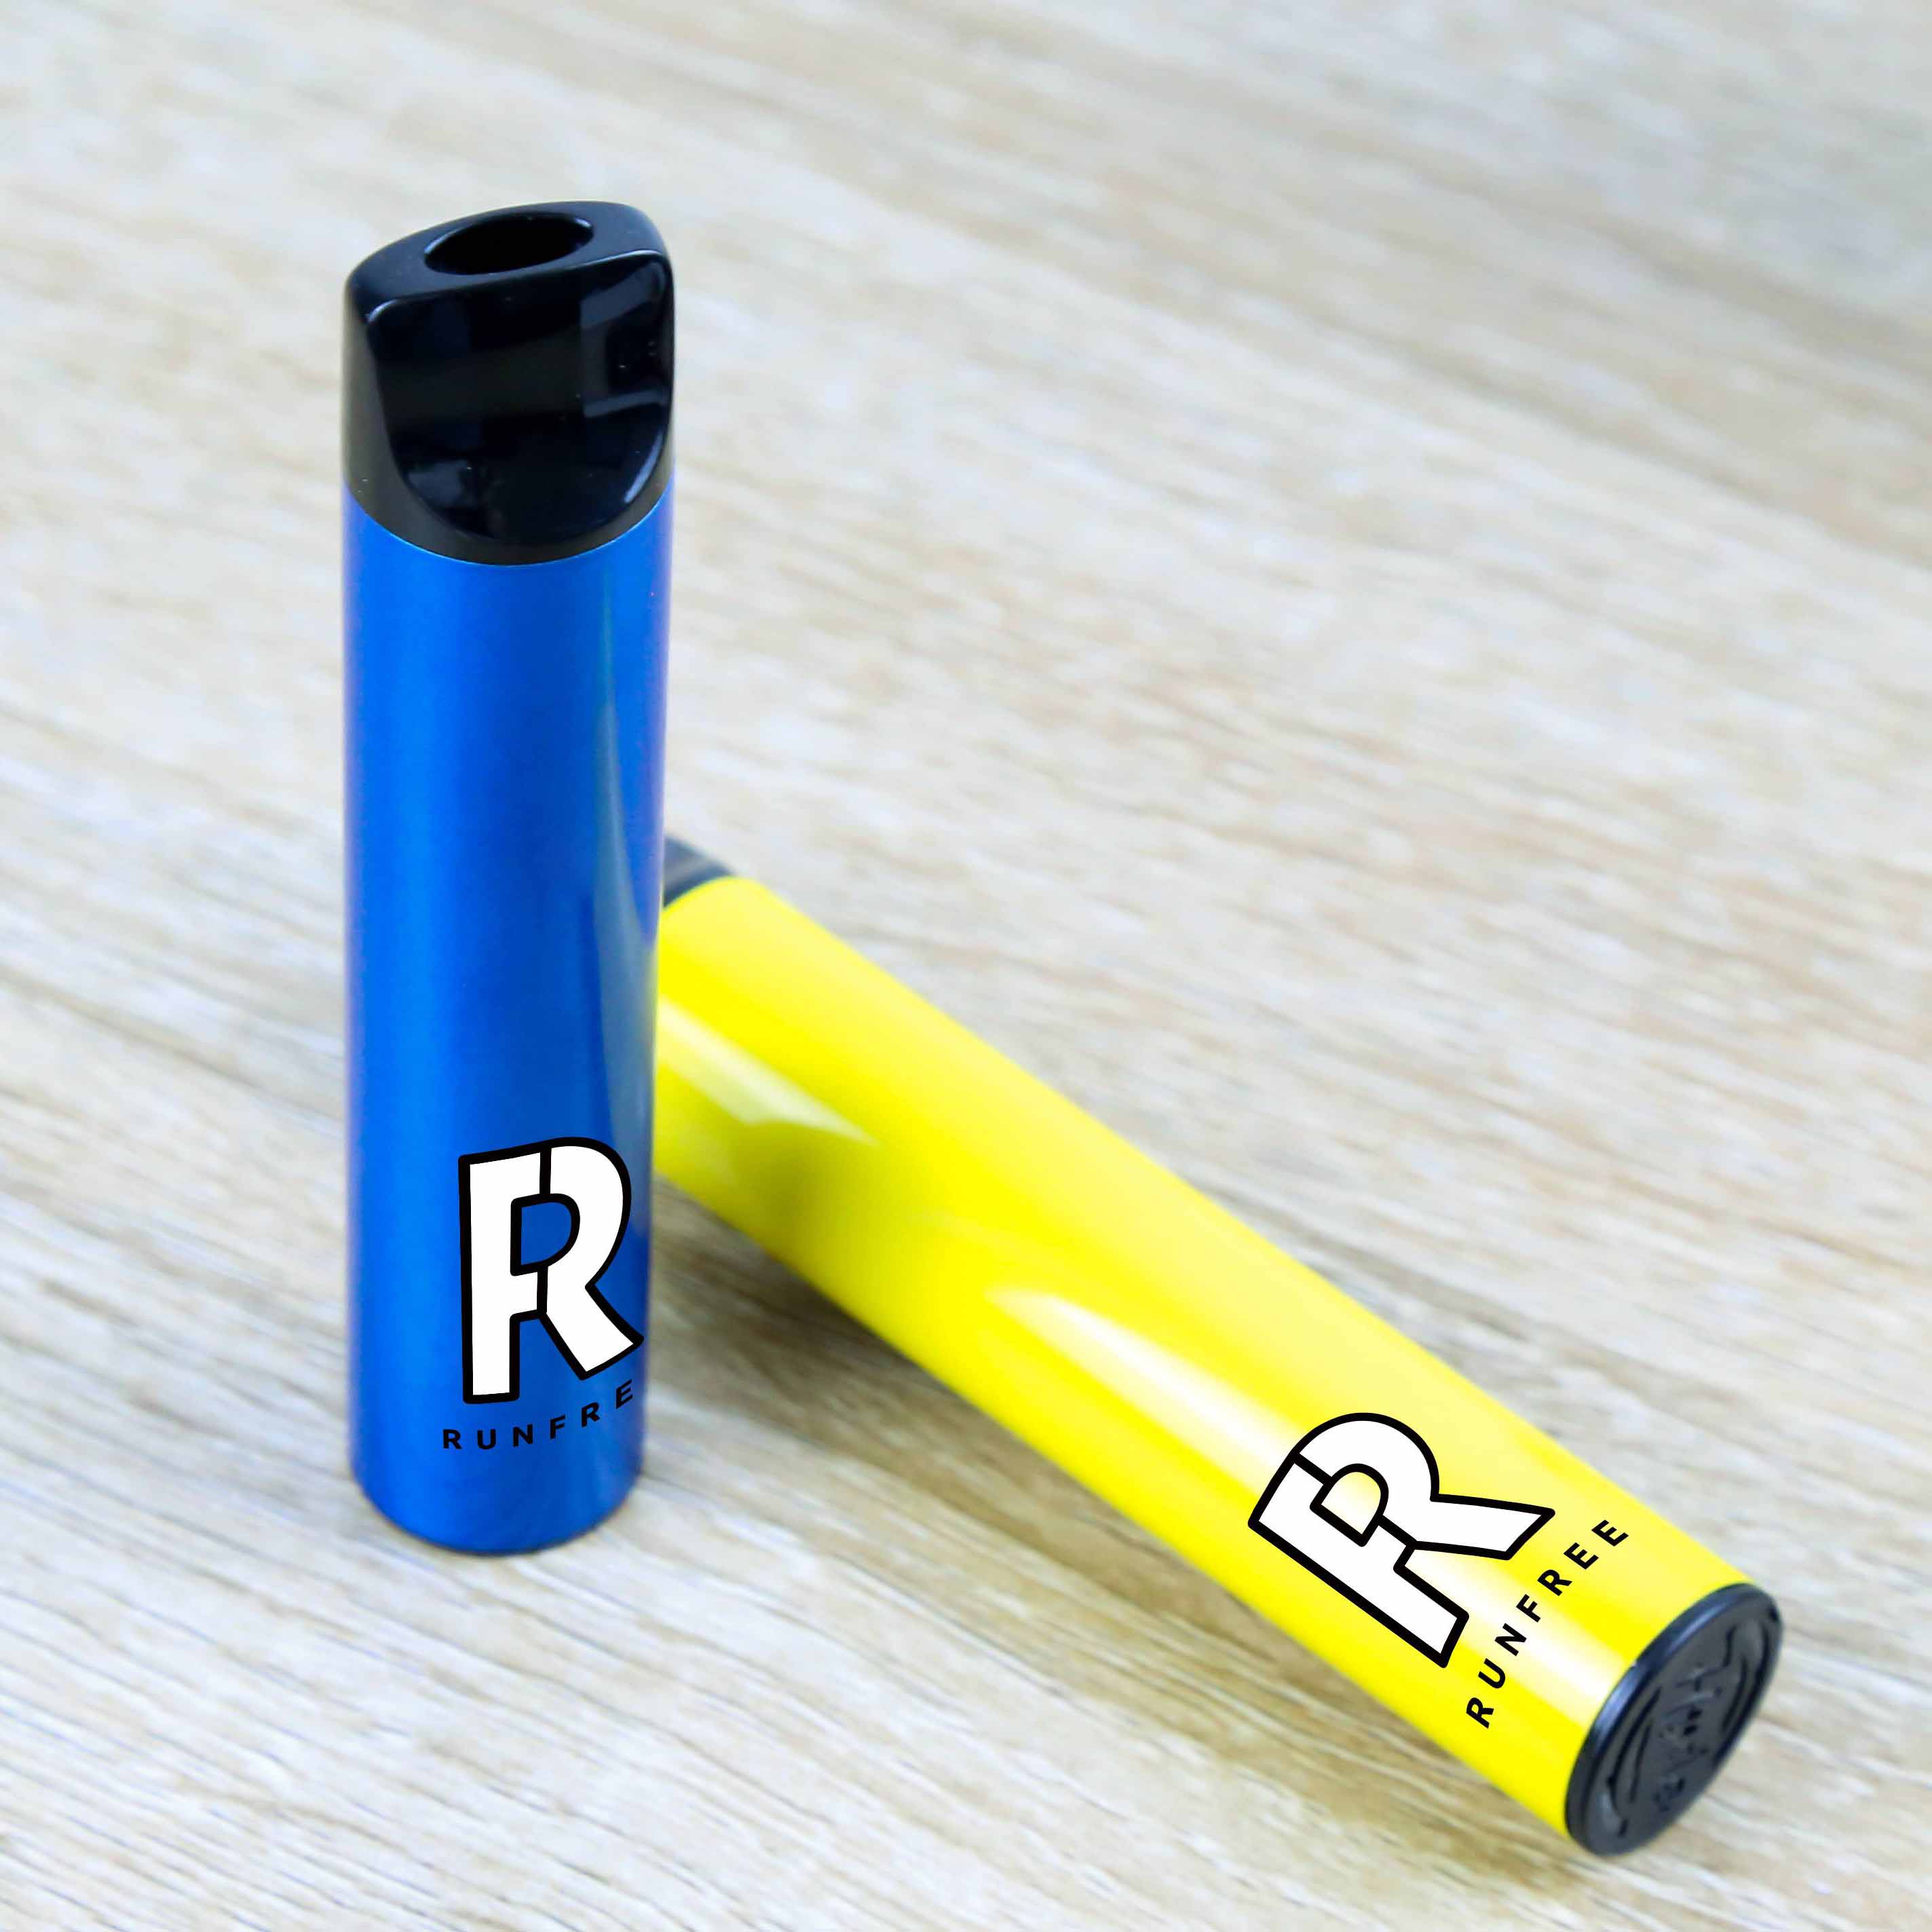 Runfree portable electronic cigarettes for sale supplier as gift-2